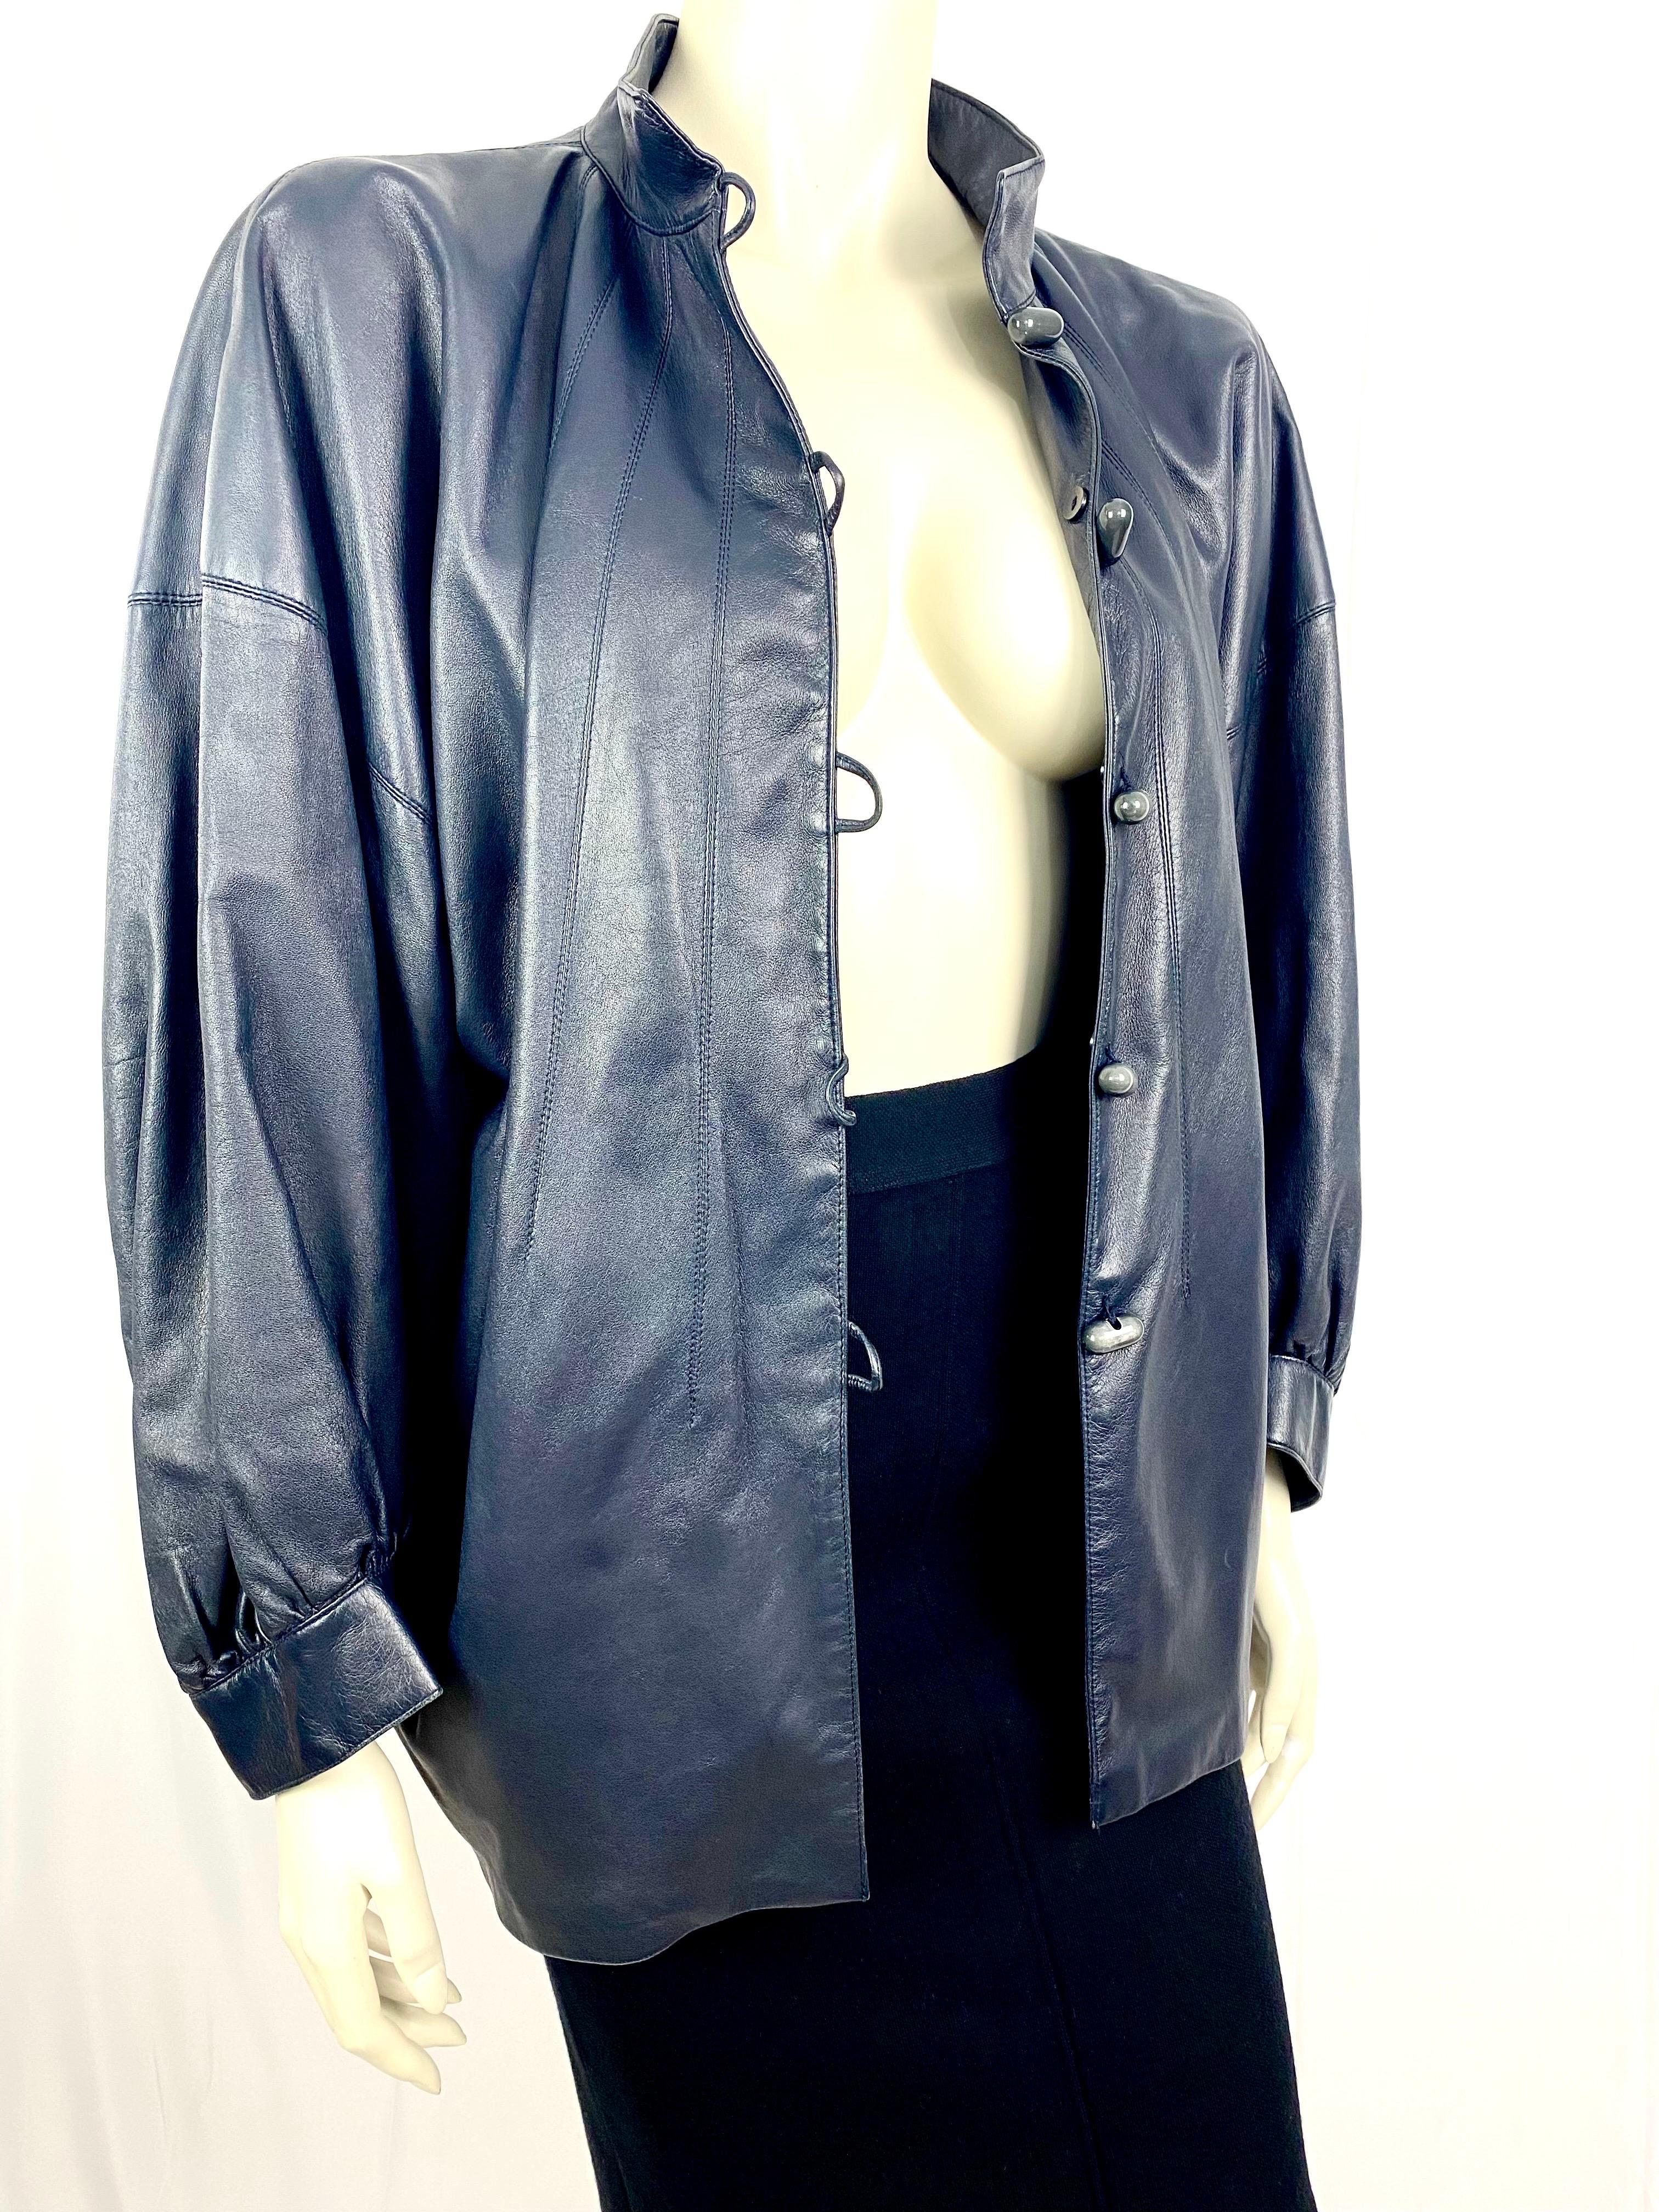 Vintage lamb leather jacket by Yves saint laurent rive gauche  from the 1980s 6